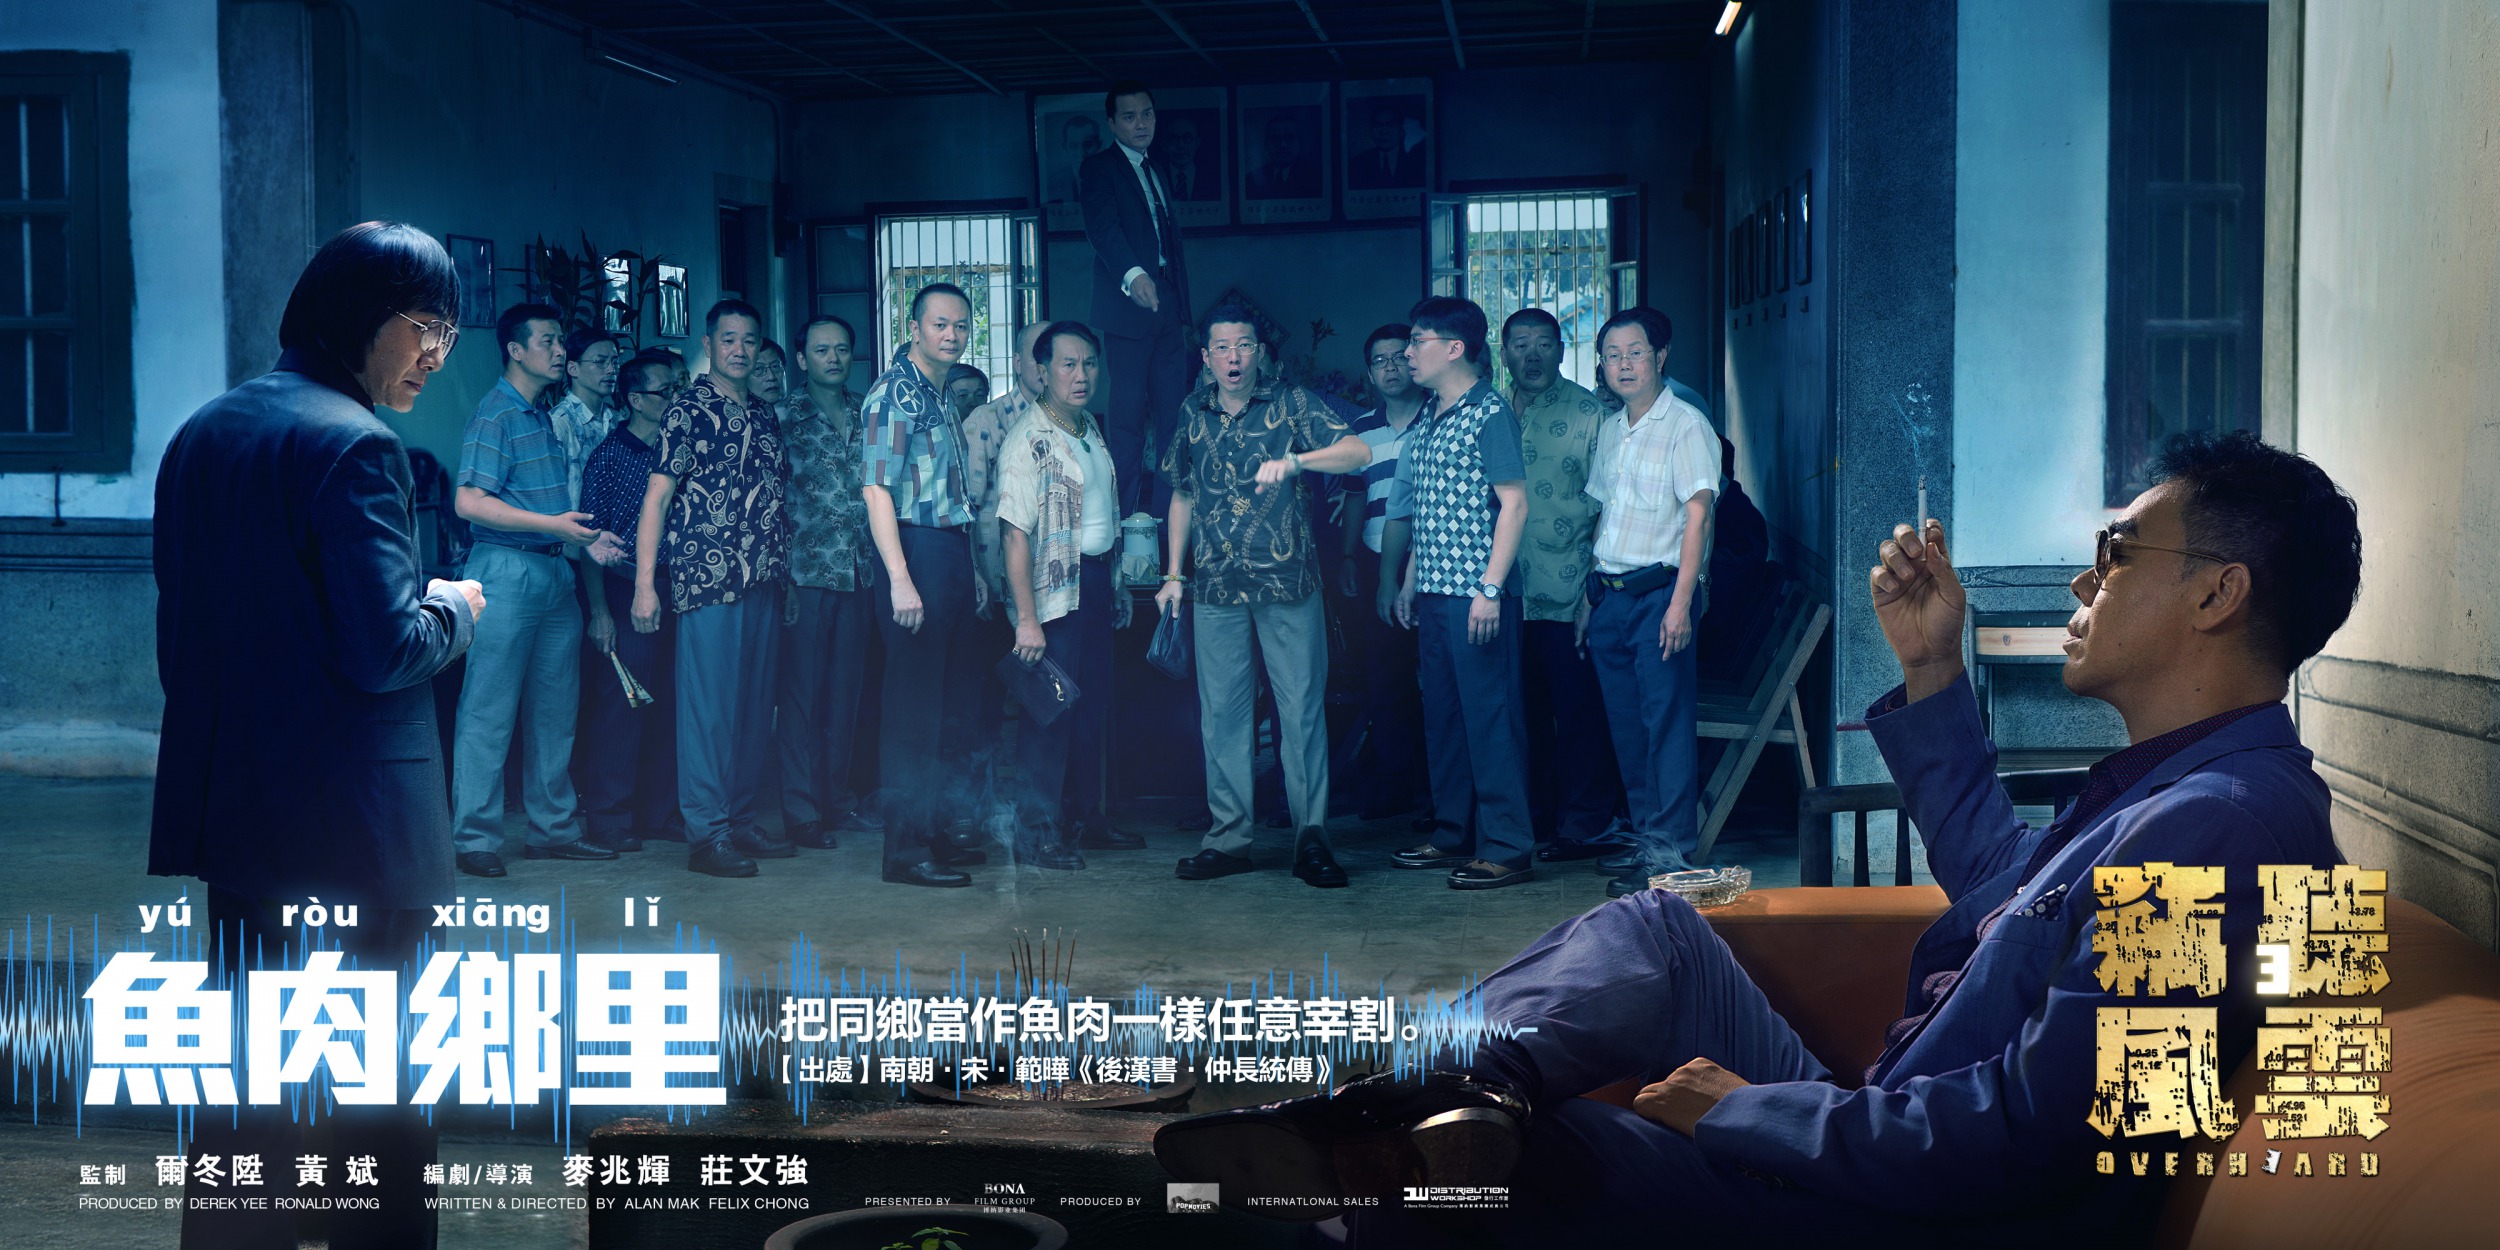 Mega Sized Movie Poster Image for Sit ting fung wan 3 (#1 of 7)